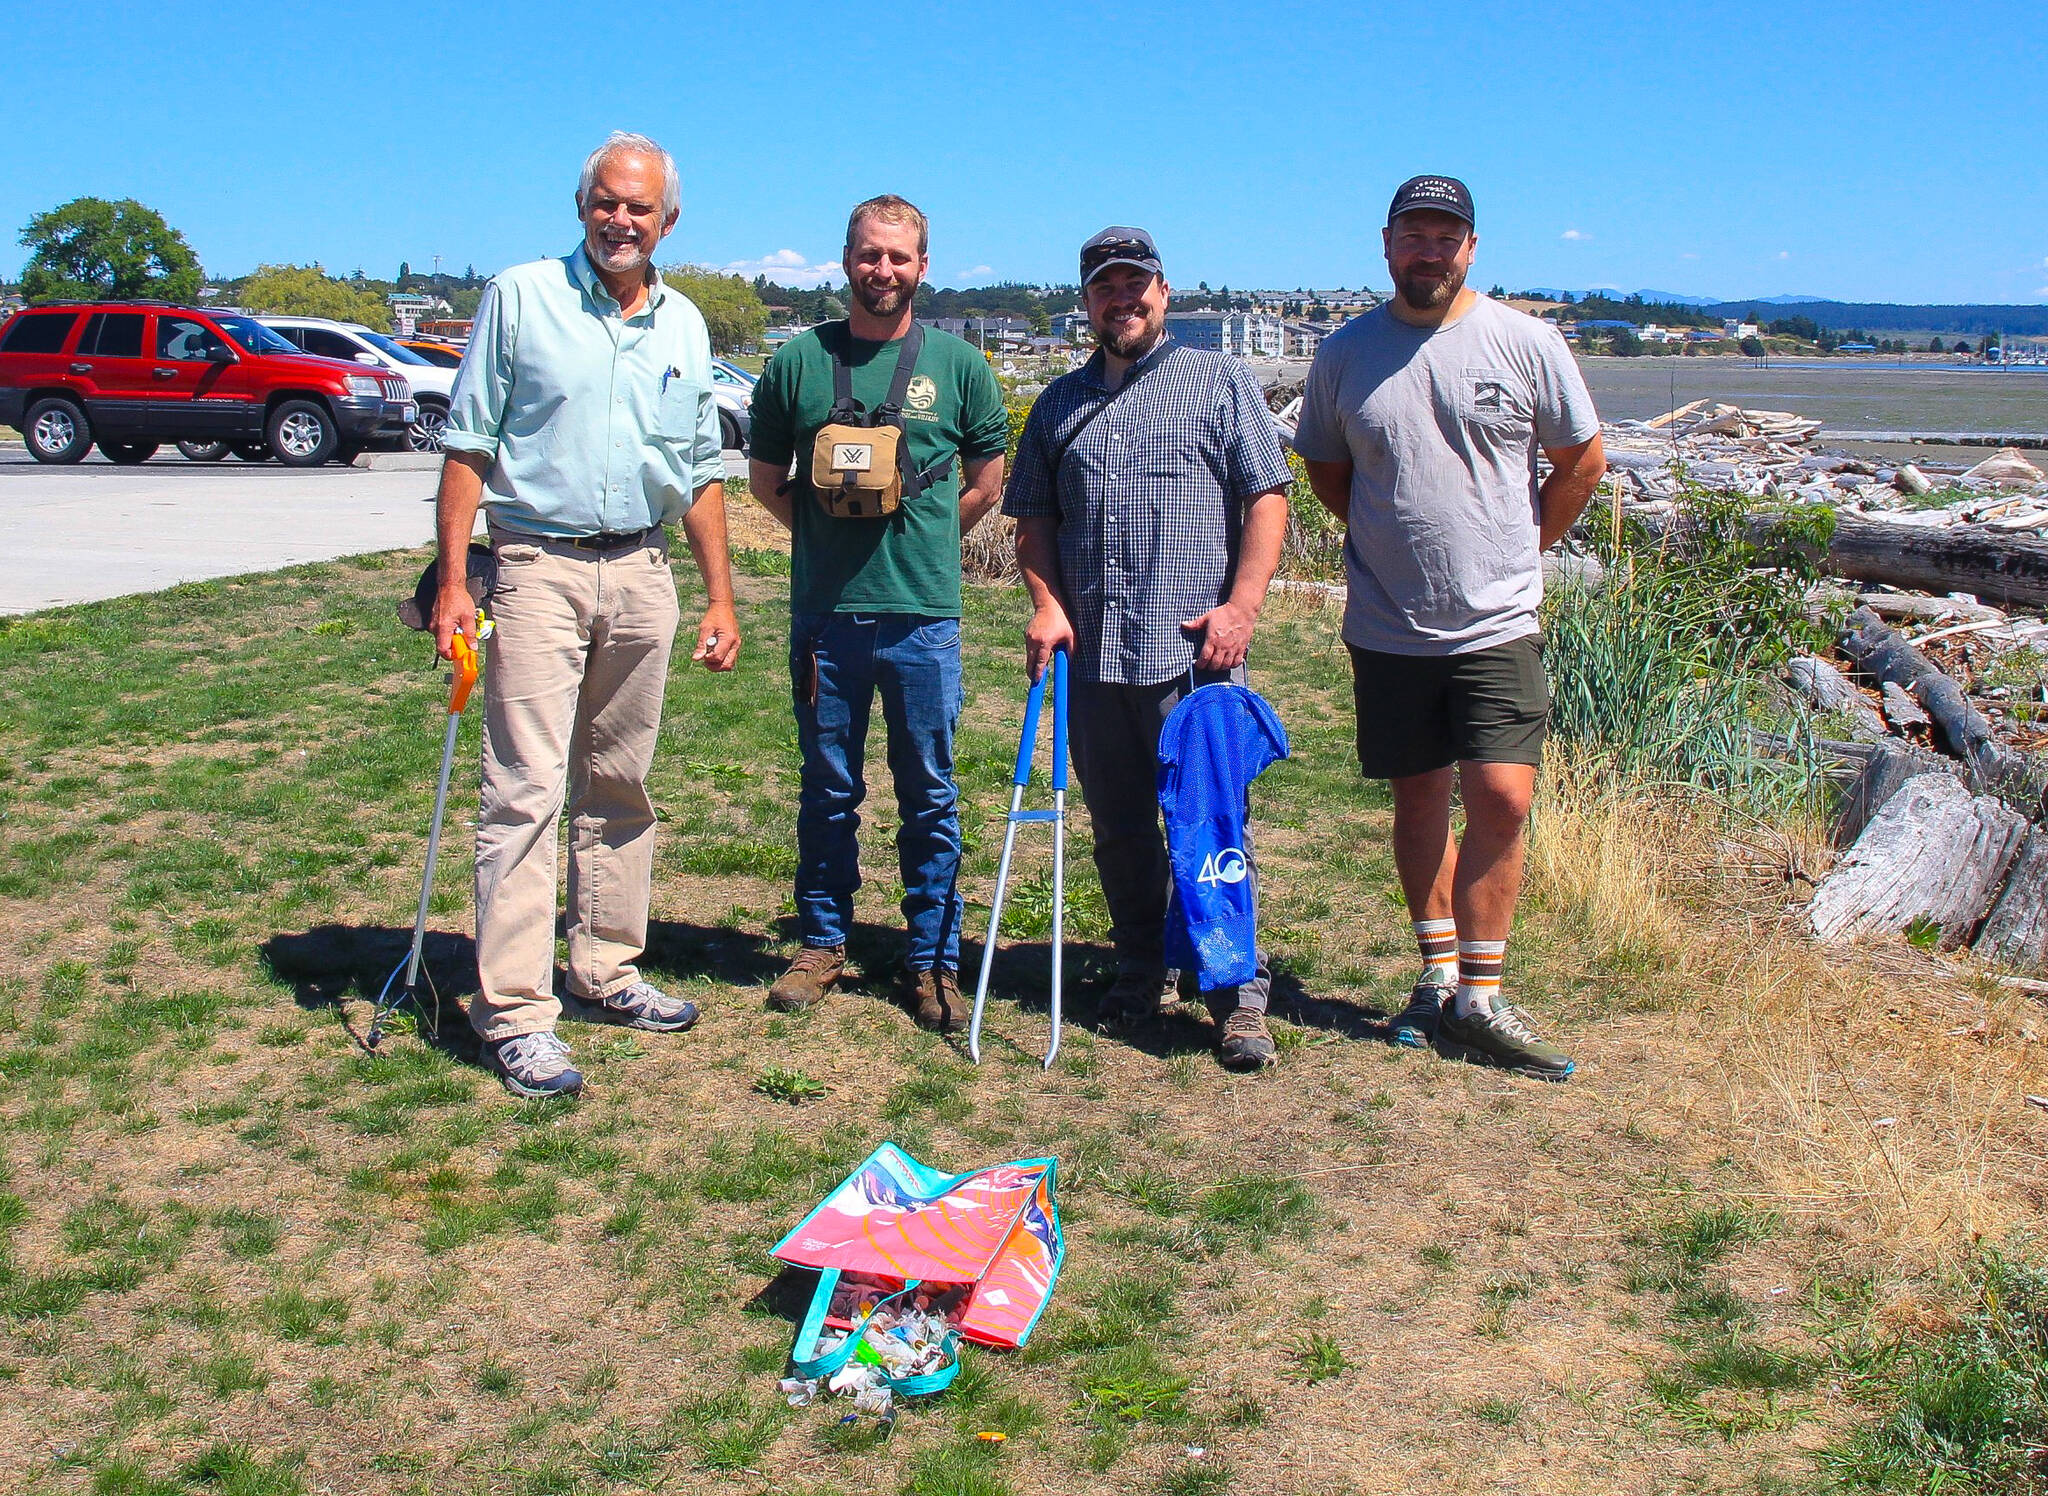 From left, Darwin Christopherson, Washington Department of Fish and Wildlife Biologist Kurt Licence, WDFW Waterfrowl Section Manager Kyle Spragens and Peter Steelquist pose with the wads they collected at Windjammer Park on Aug. 2. (Photo by Luisa Loi/Whidbey News-Times)